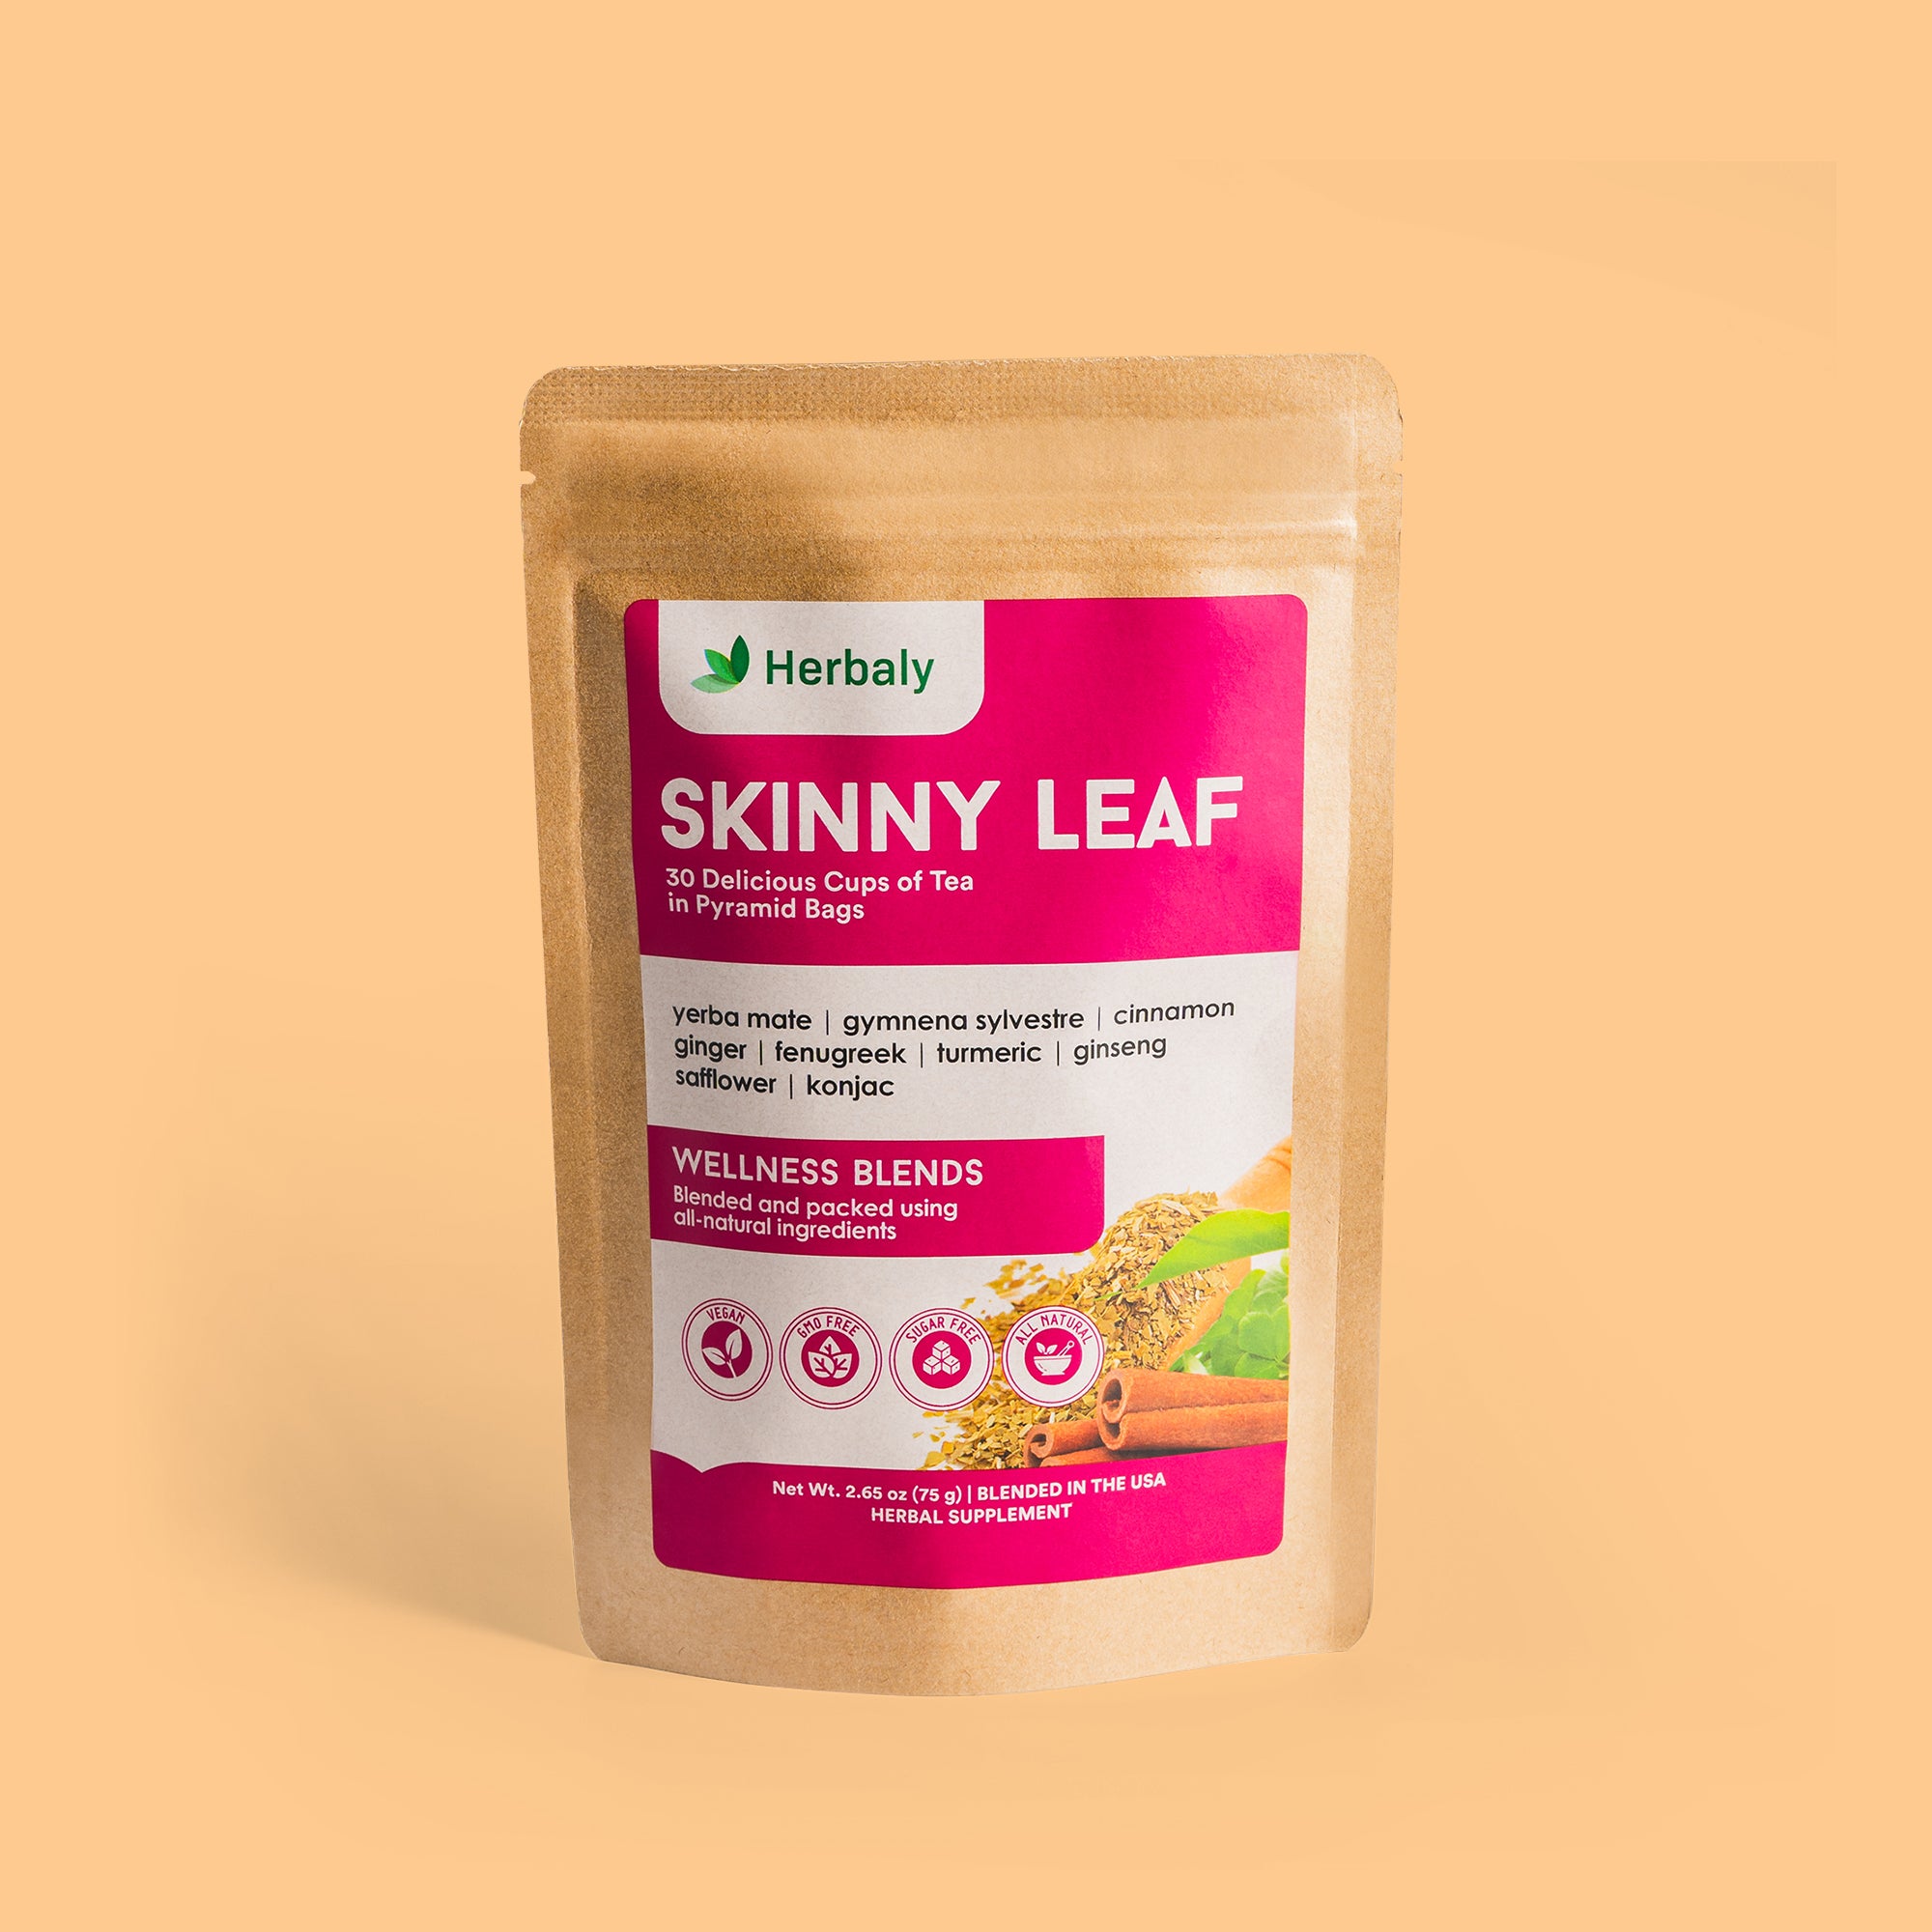 Front shot of Herbaly's Skinny Leaf Functional Tea package showing the label details